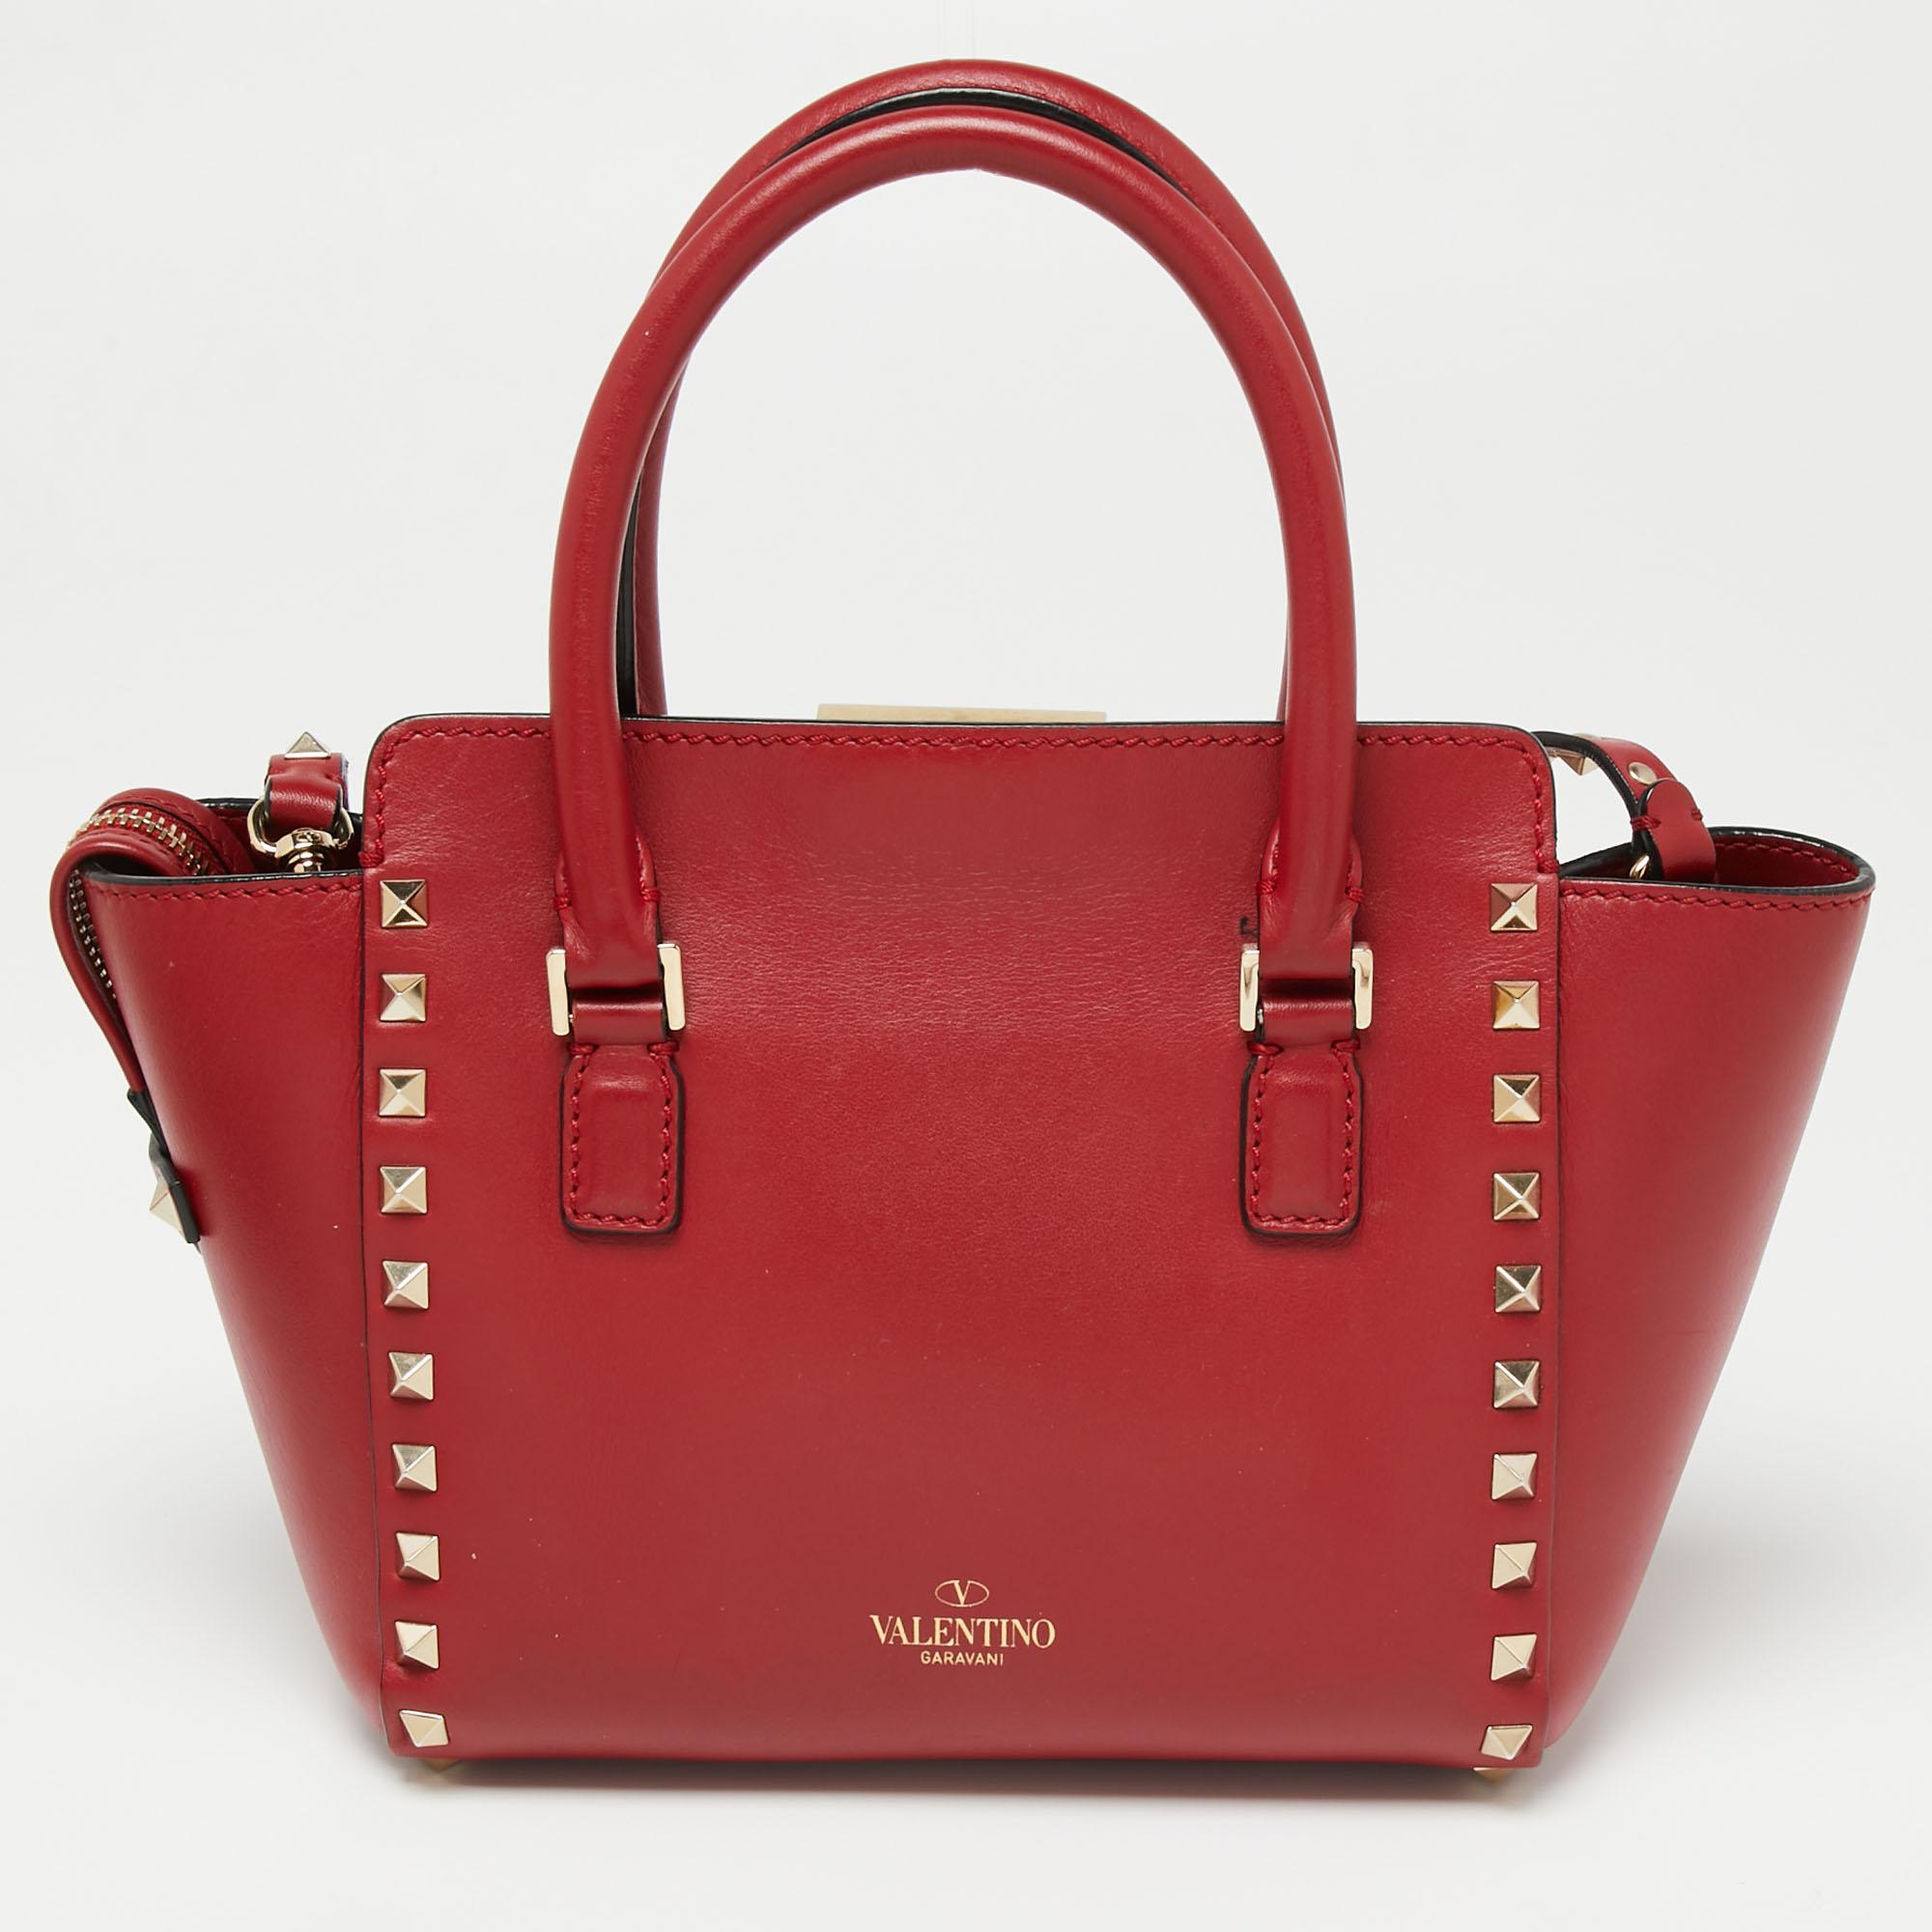 This gorgeous tote from the House of Valentino brings you endless practicality, style, and luxury. It is fashioned in red leather and is augmented with the iconic Rockstud embellishments. It is enhanced with dual handles, a spacious fabric-lined